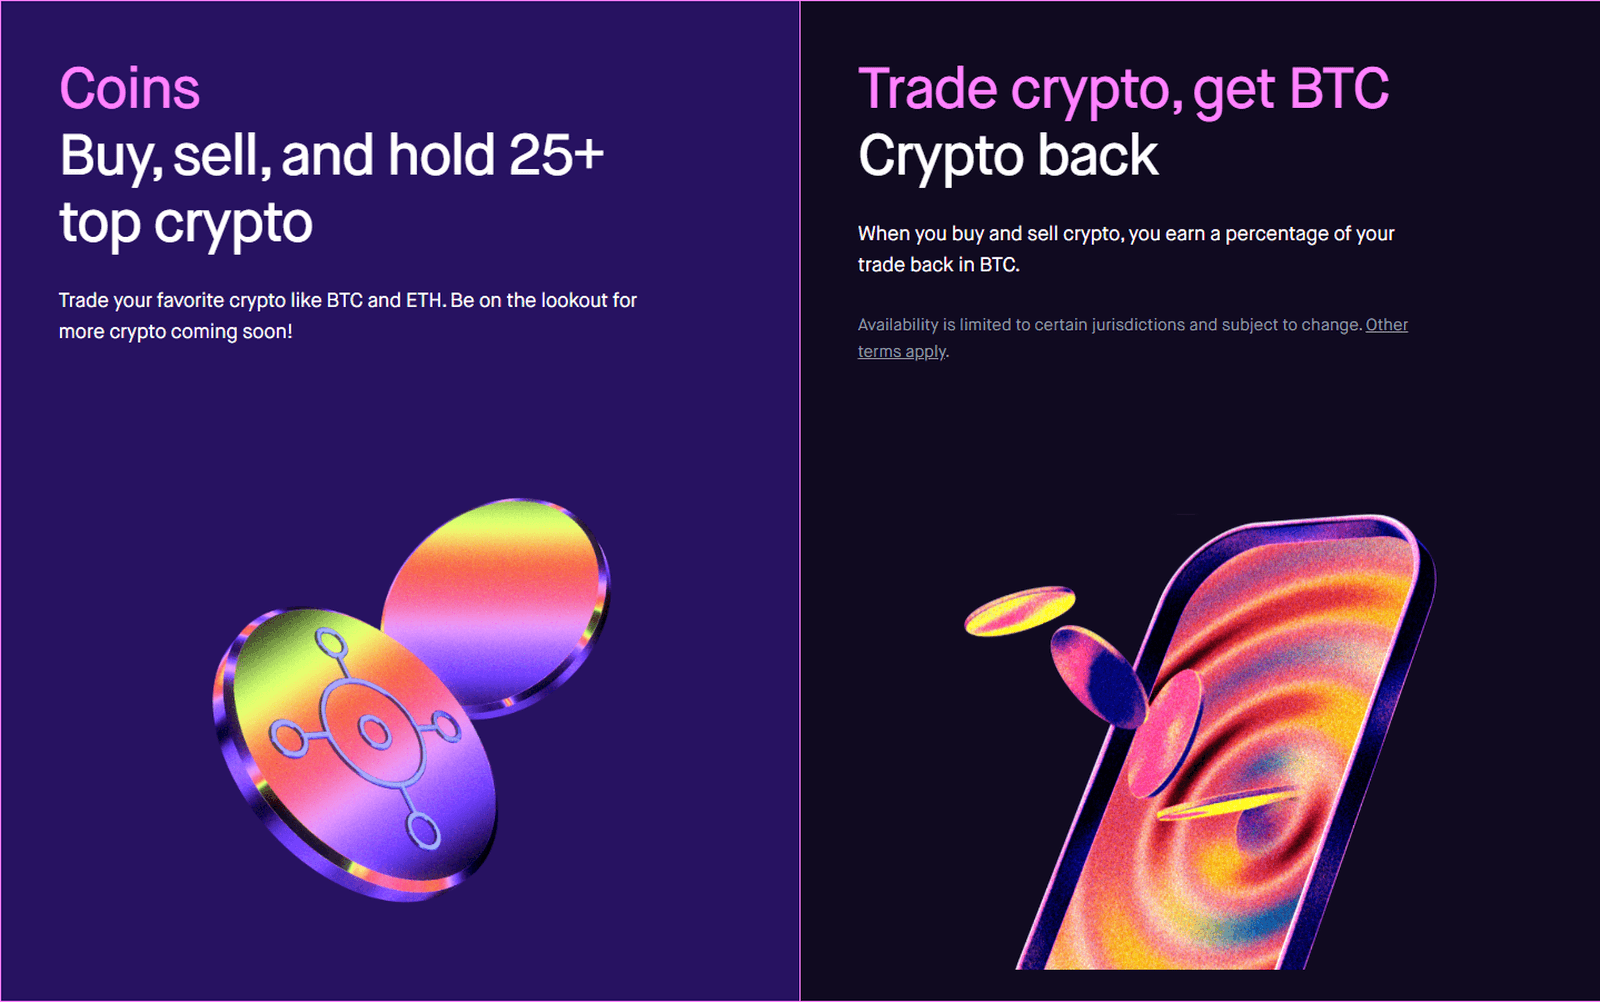 Number of tokens and cashback available for using Robinhood